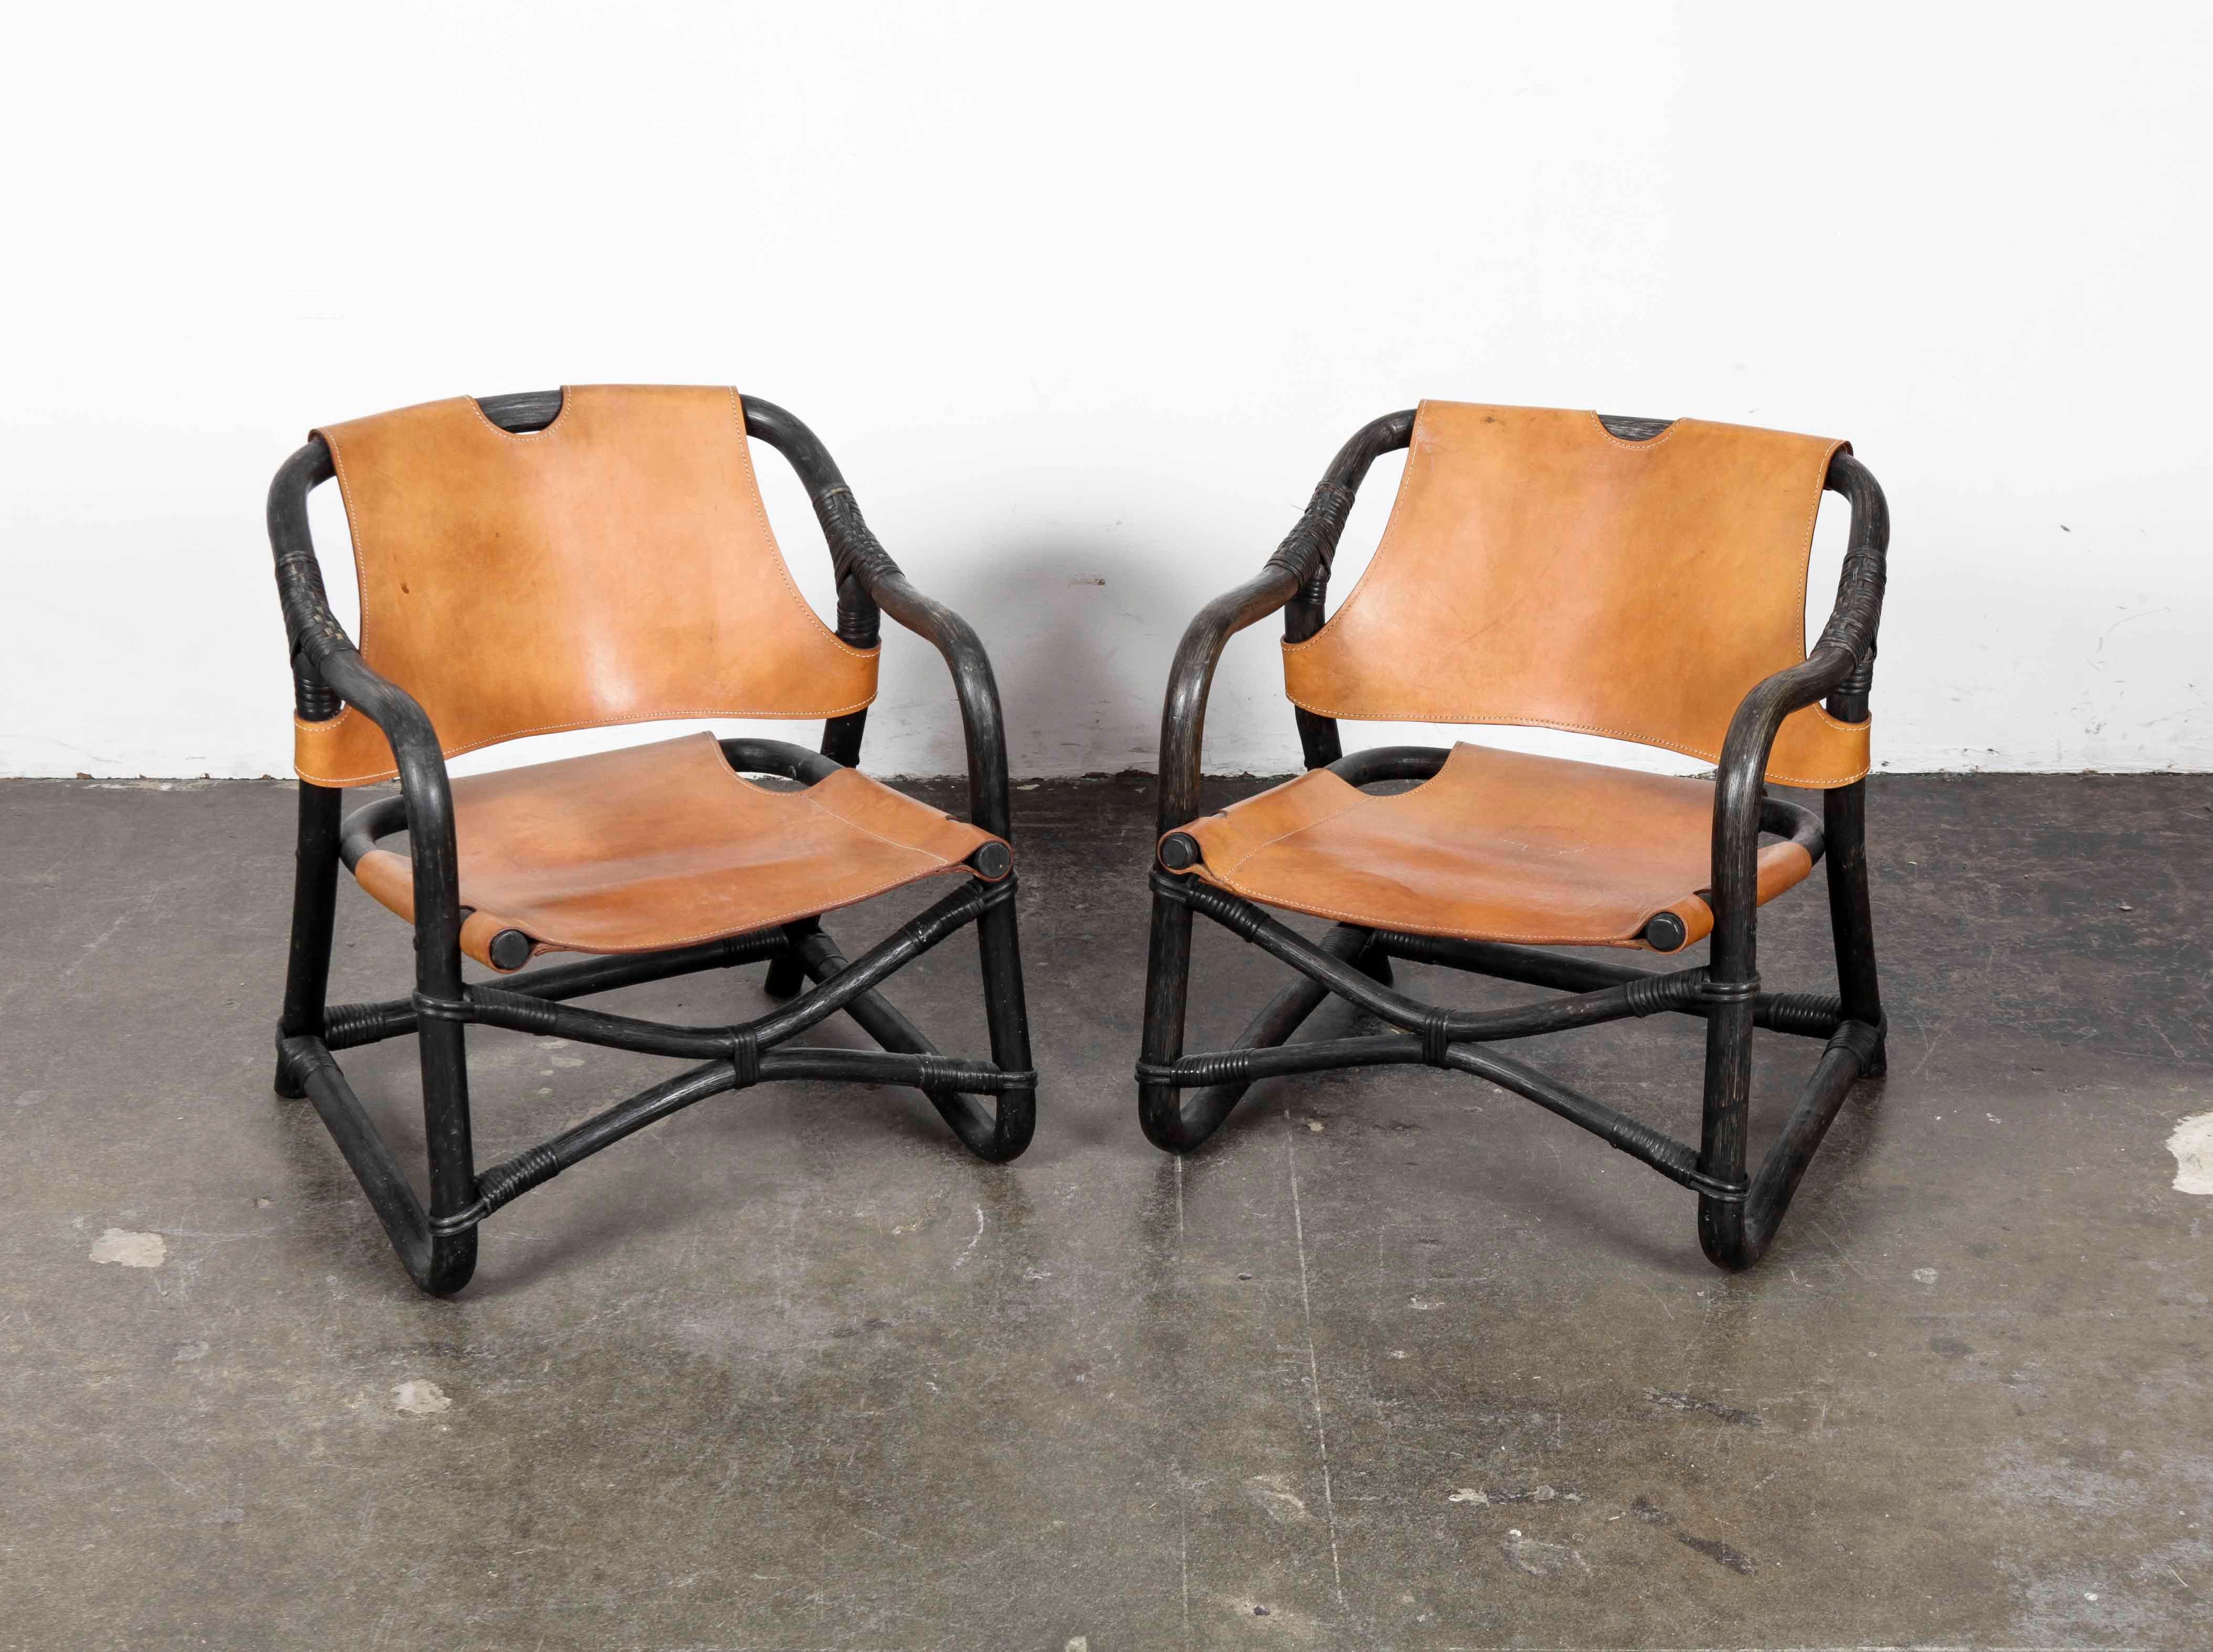 Pair of Swedish 1970s black lacquered bamboo framed chairs with original saddle colored leather sling seats and backs. Possibly vintage Ikea. Small profile chairs with a lower seat.